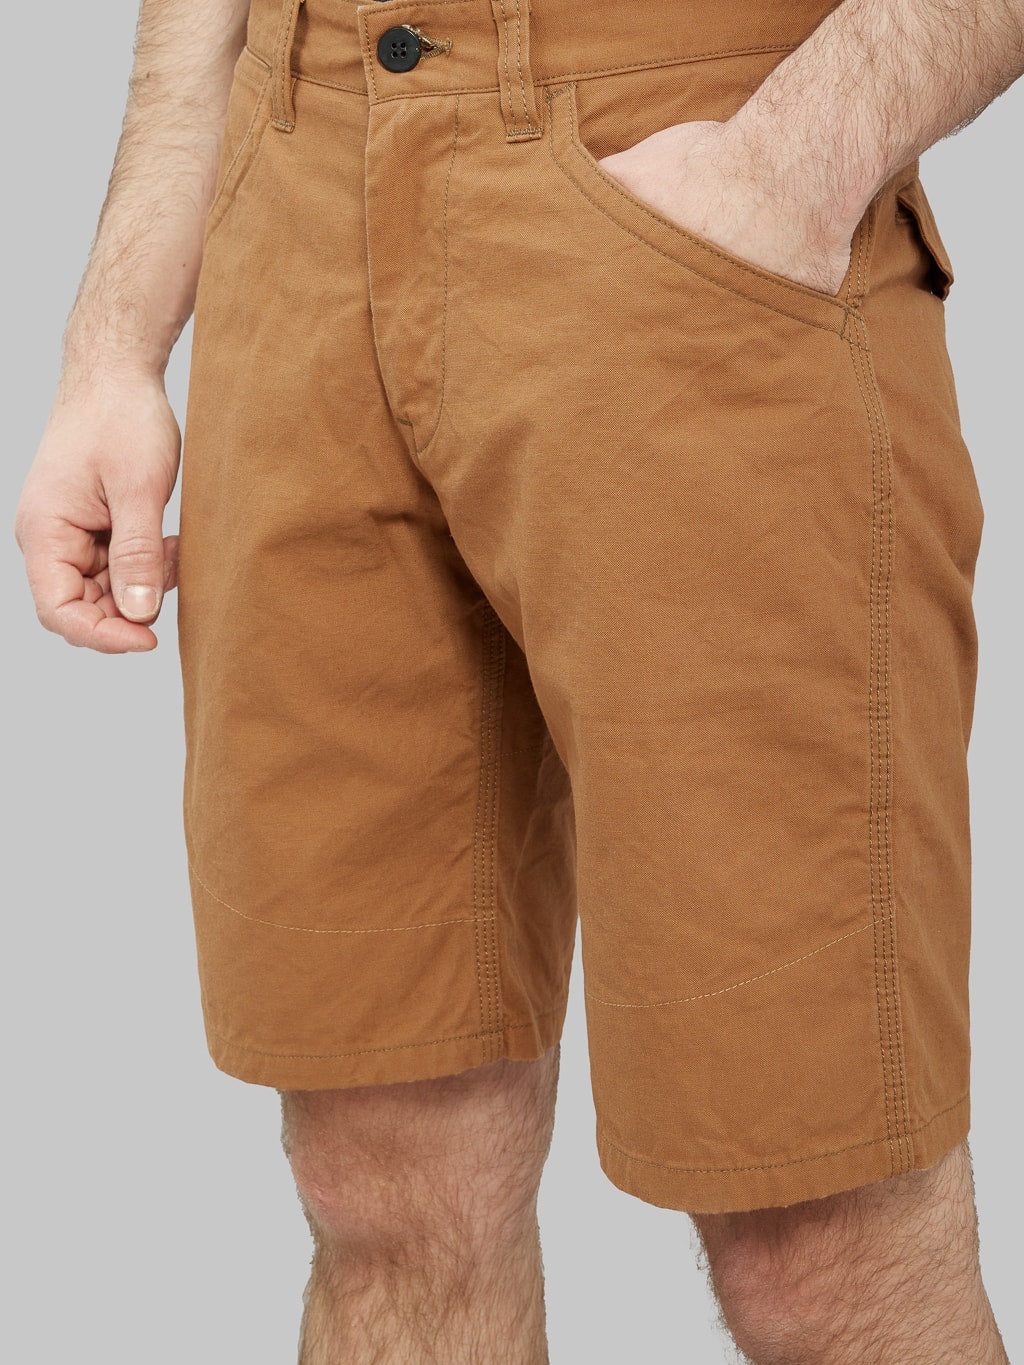 UES Duck Canvas Short Pants Brown side pocket view